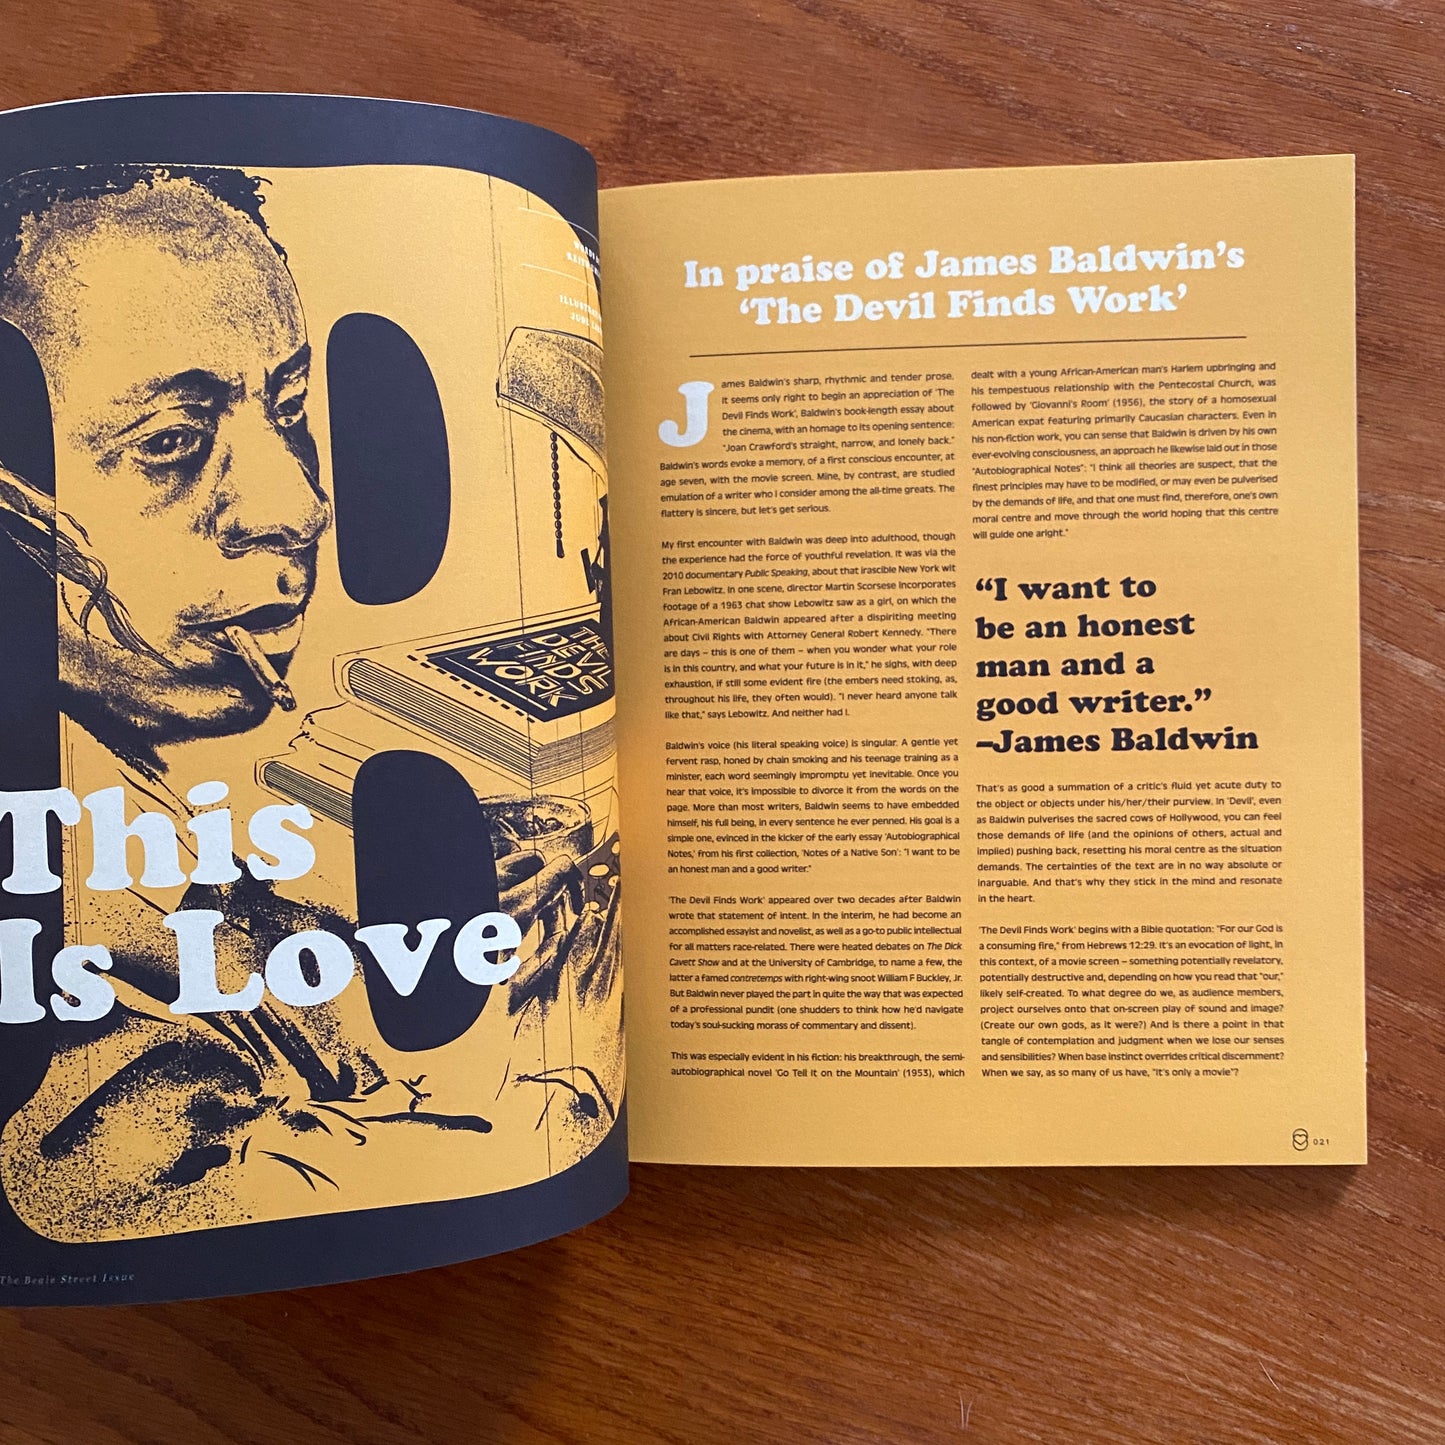 Issue 78 - If Beale Street Could Talk